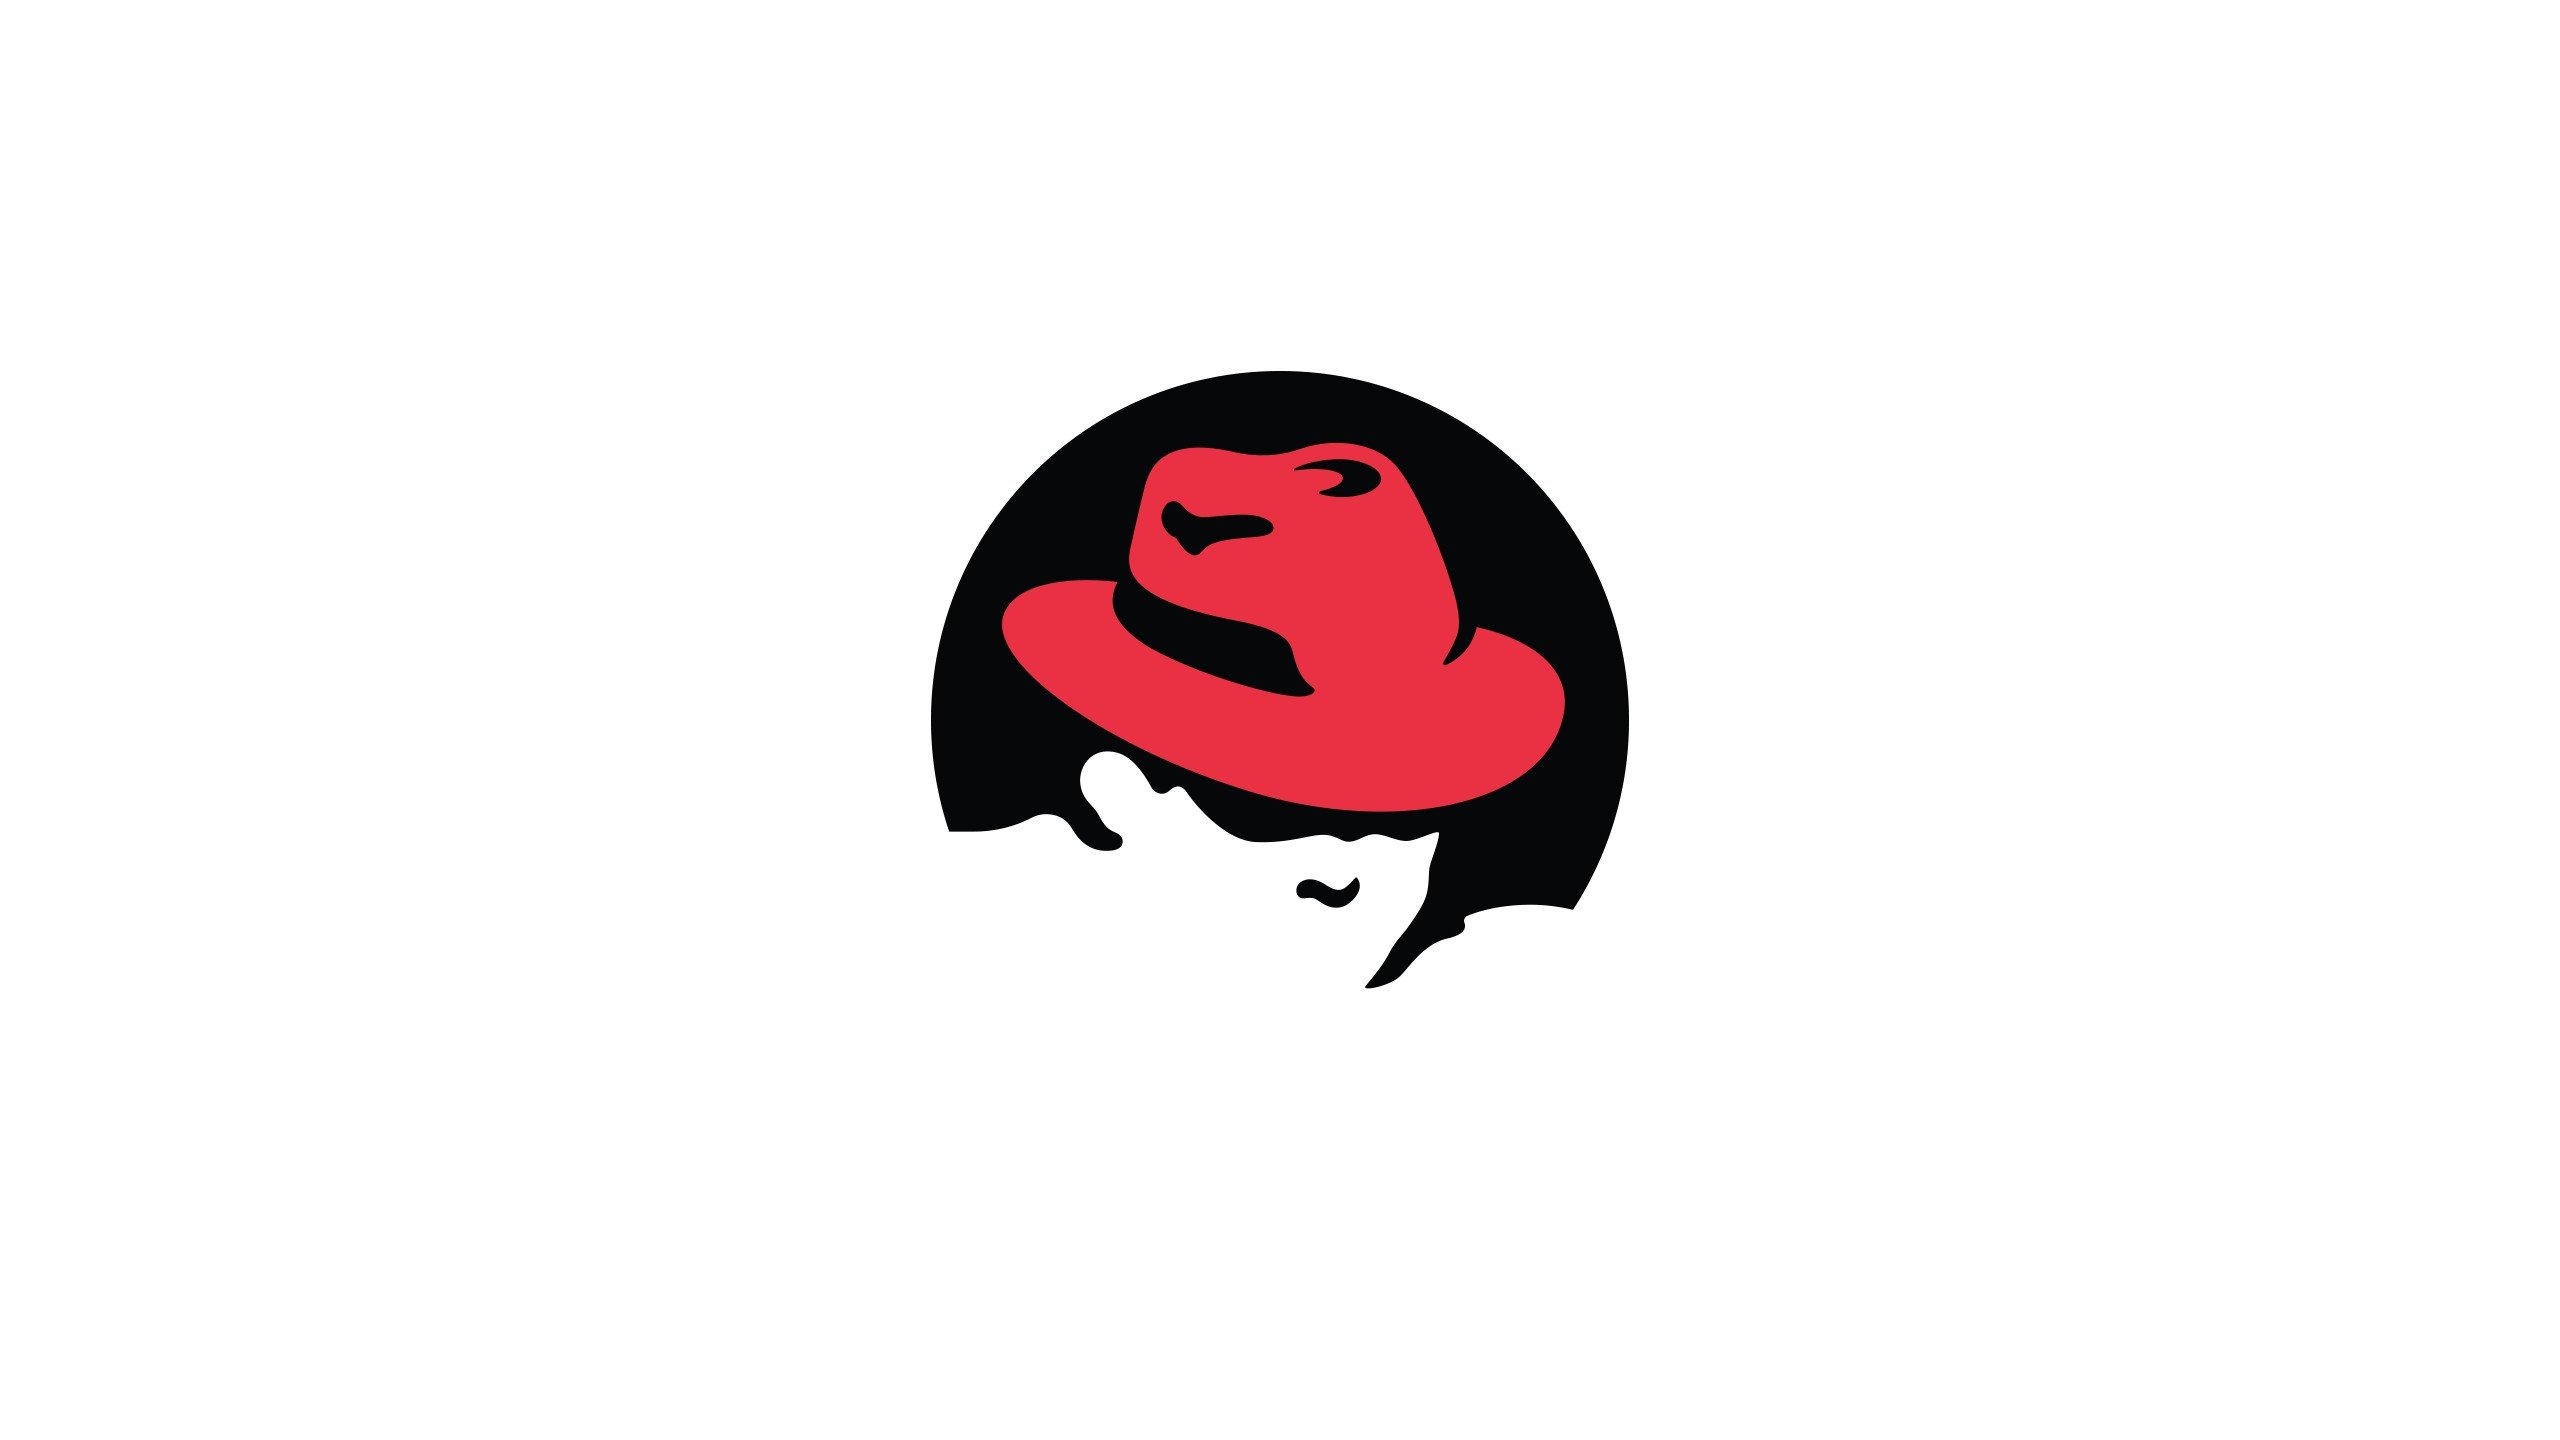 Redhat 6 download iso free